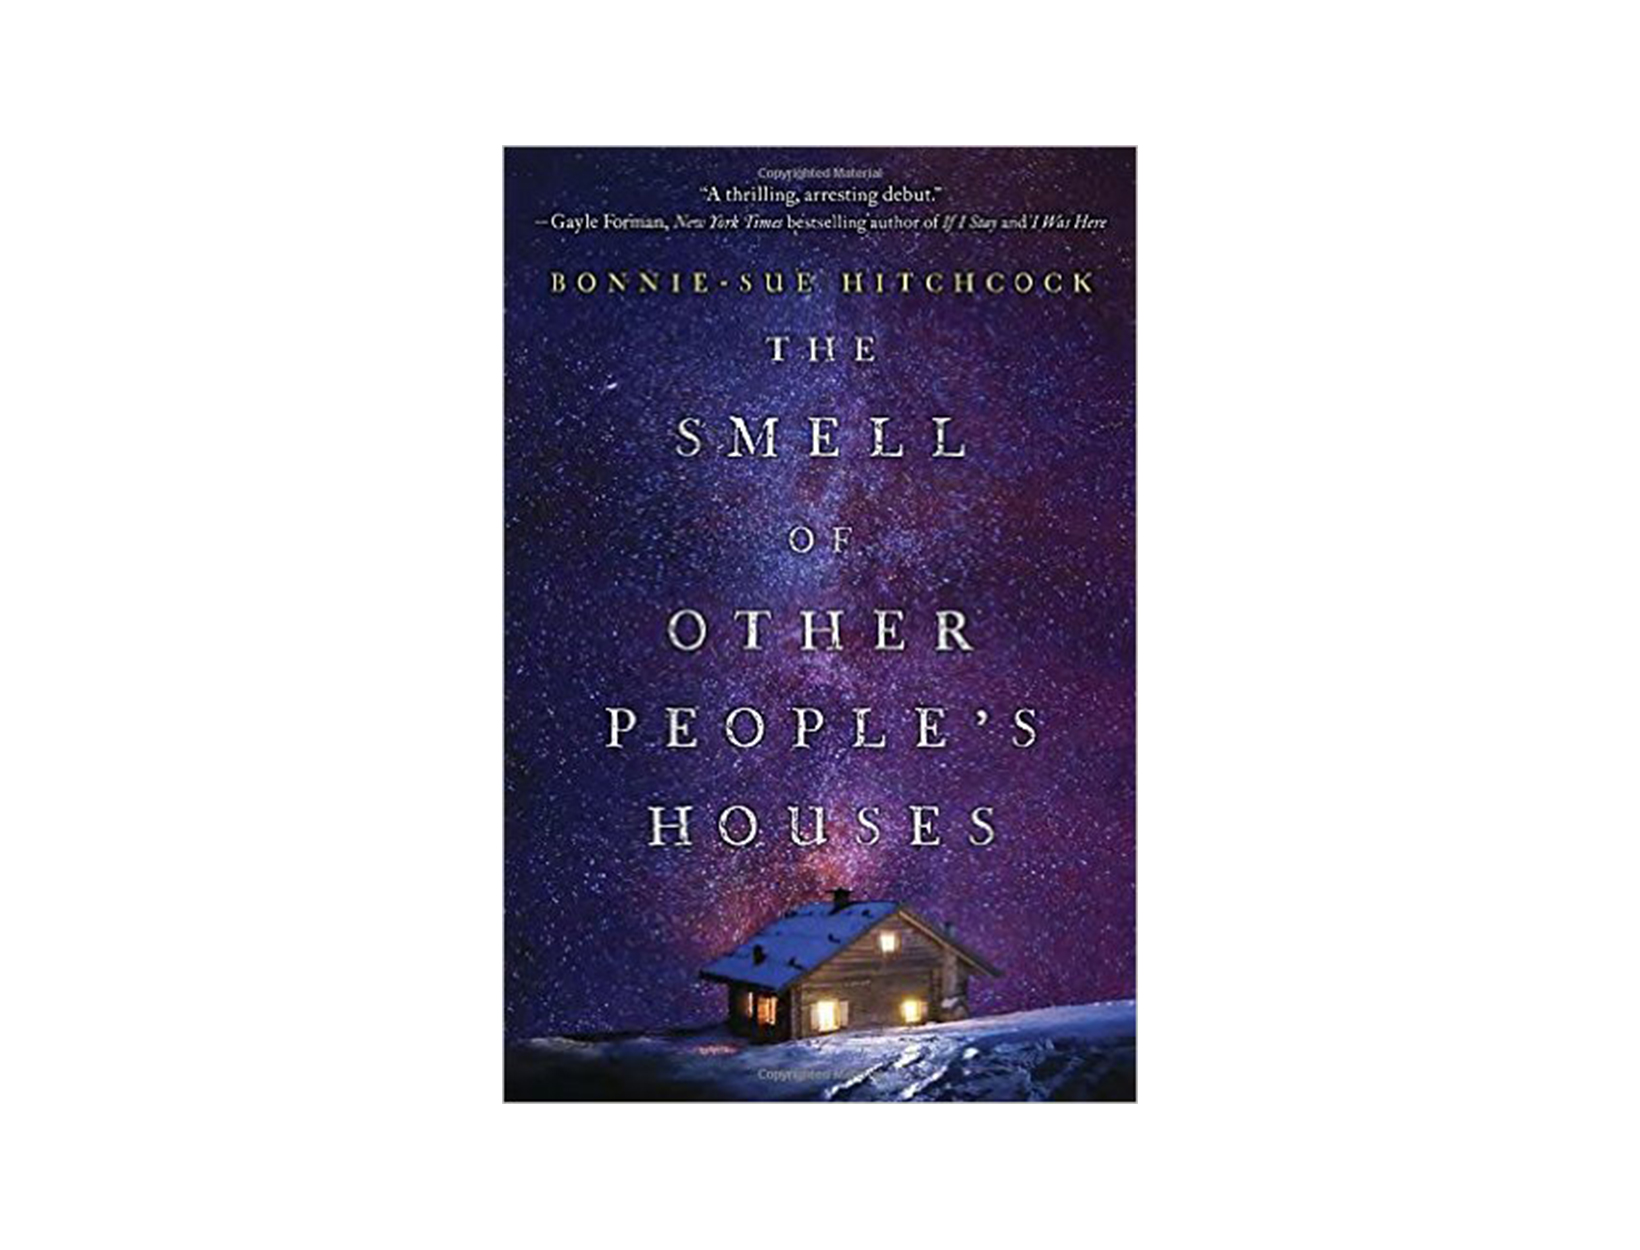 The Smell of Other People’s Houses by Bonnie-Sue Hitchcock